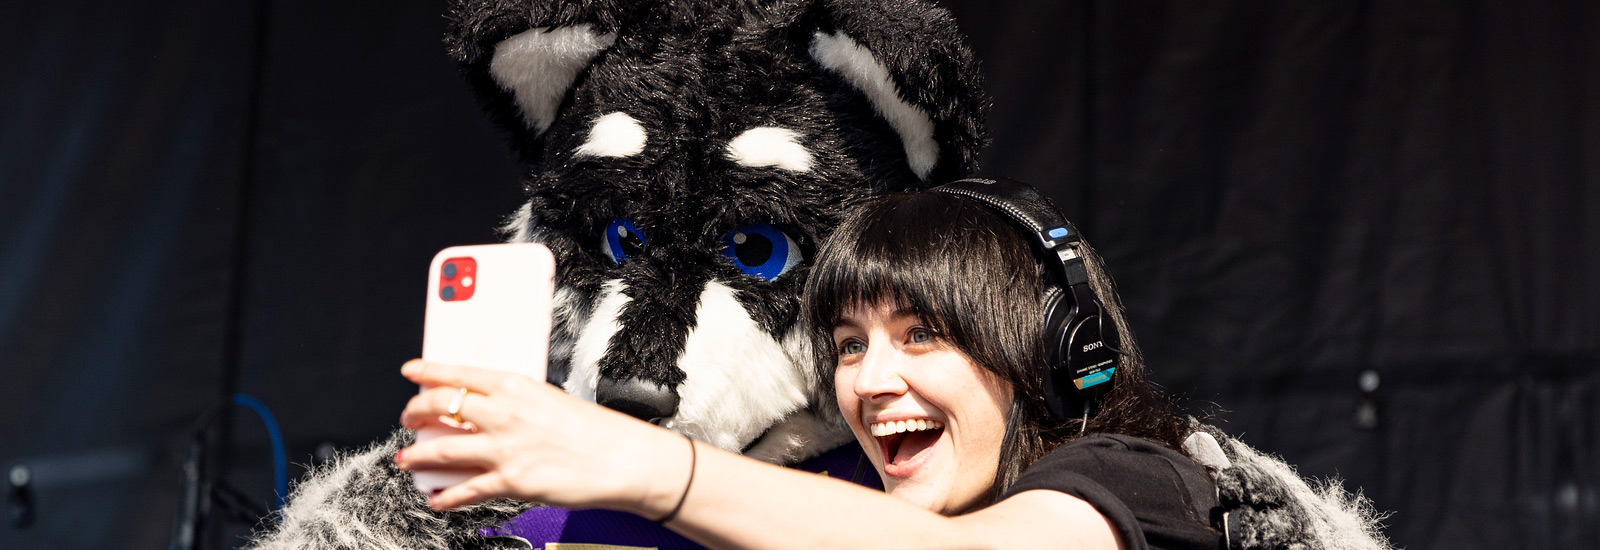 A student taking a selfie with the husky mascot